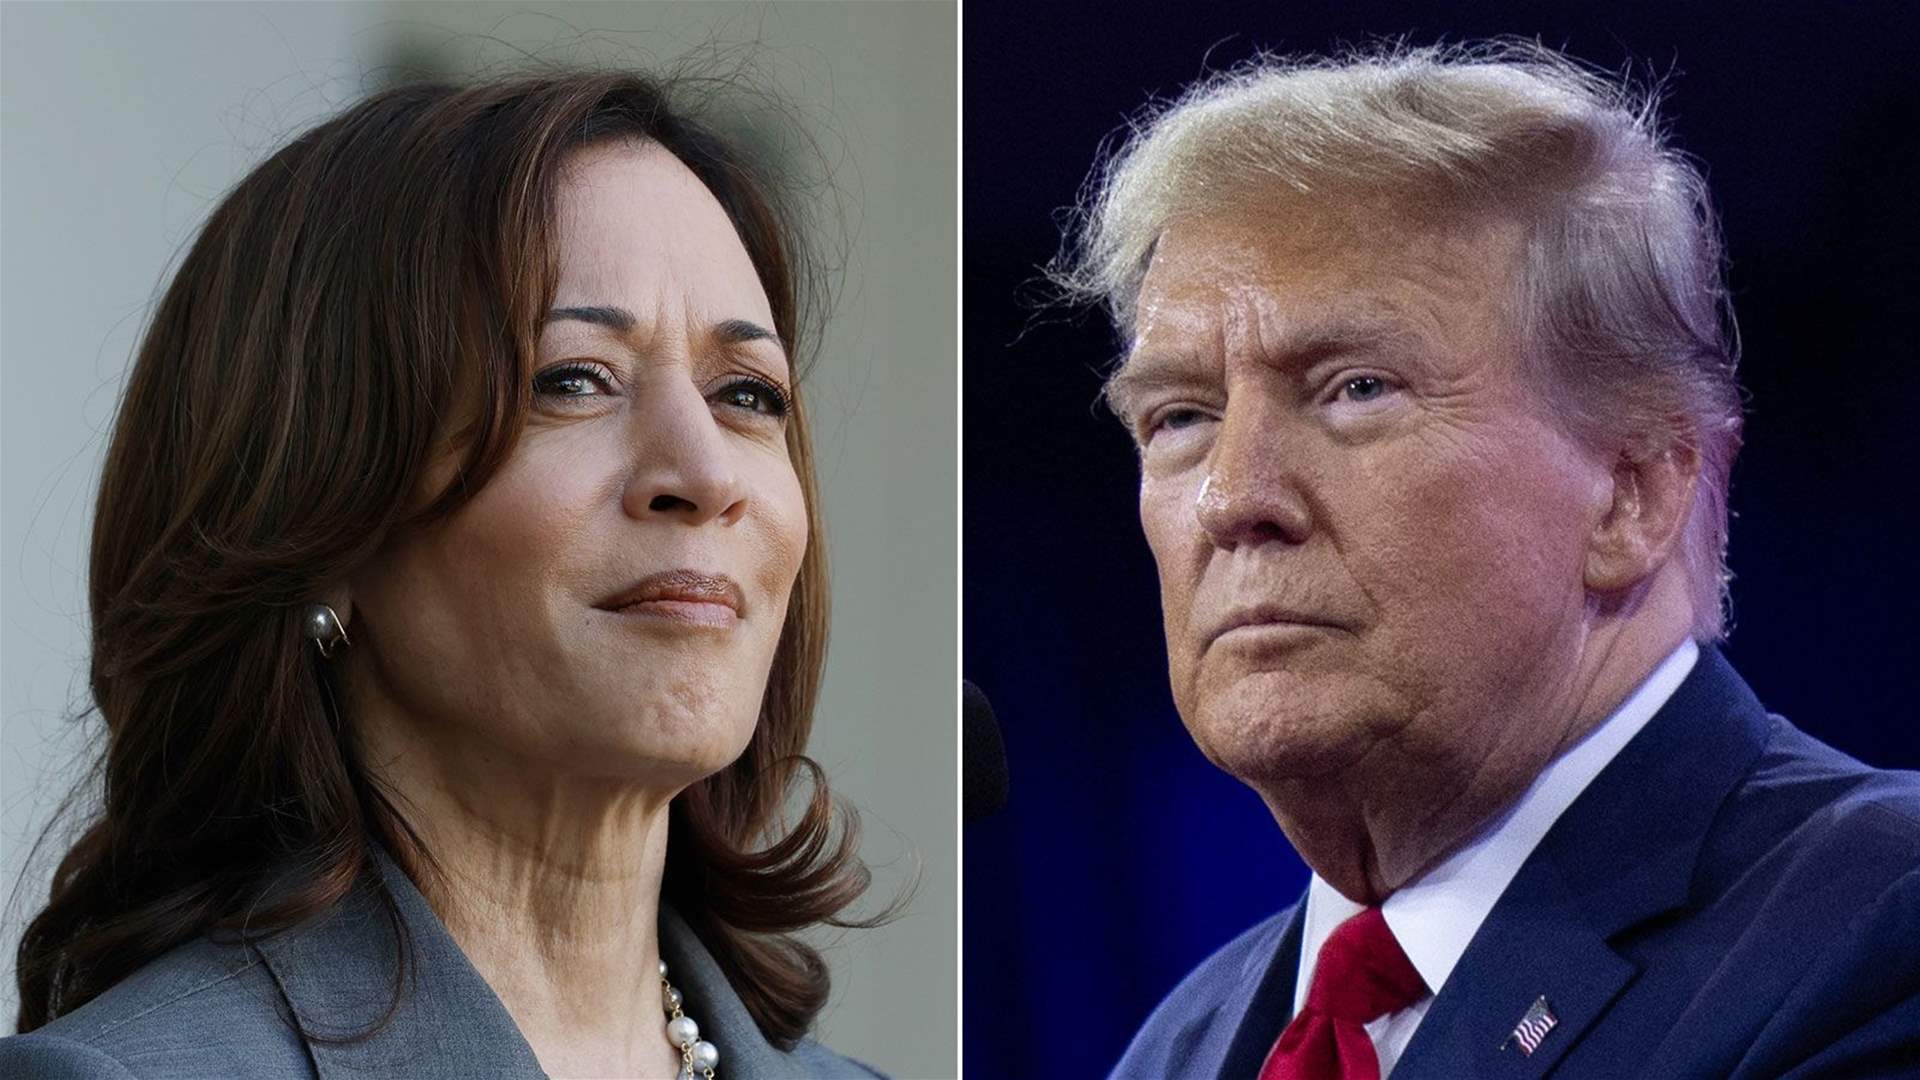 Harris leads Trump 44% to 42% in US presidential race, Reuters/Ipsos poll uncovers: Reuters 